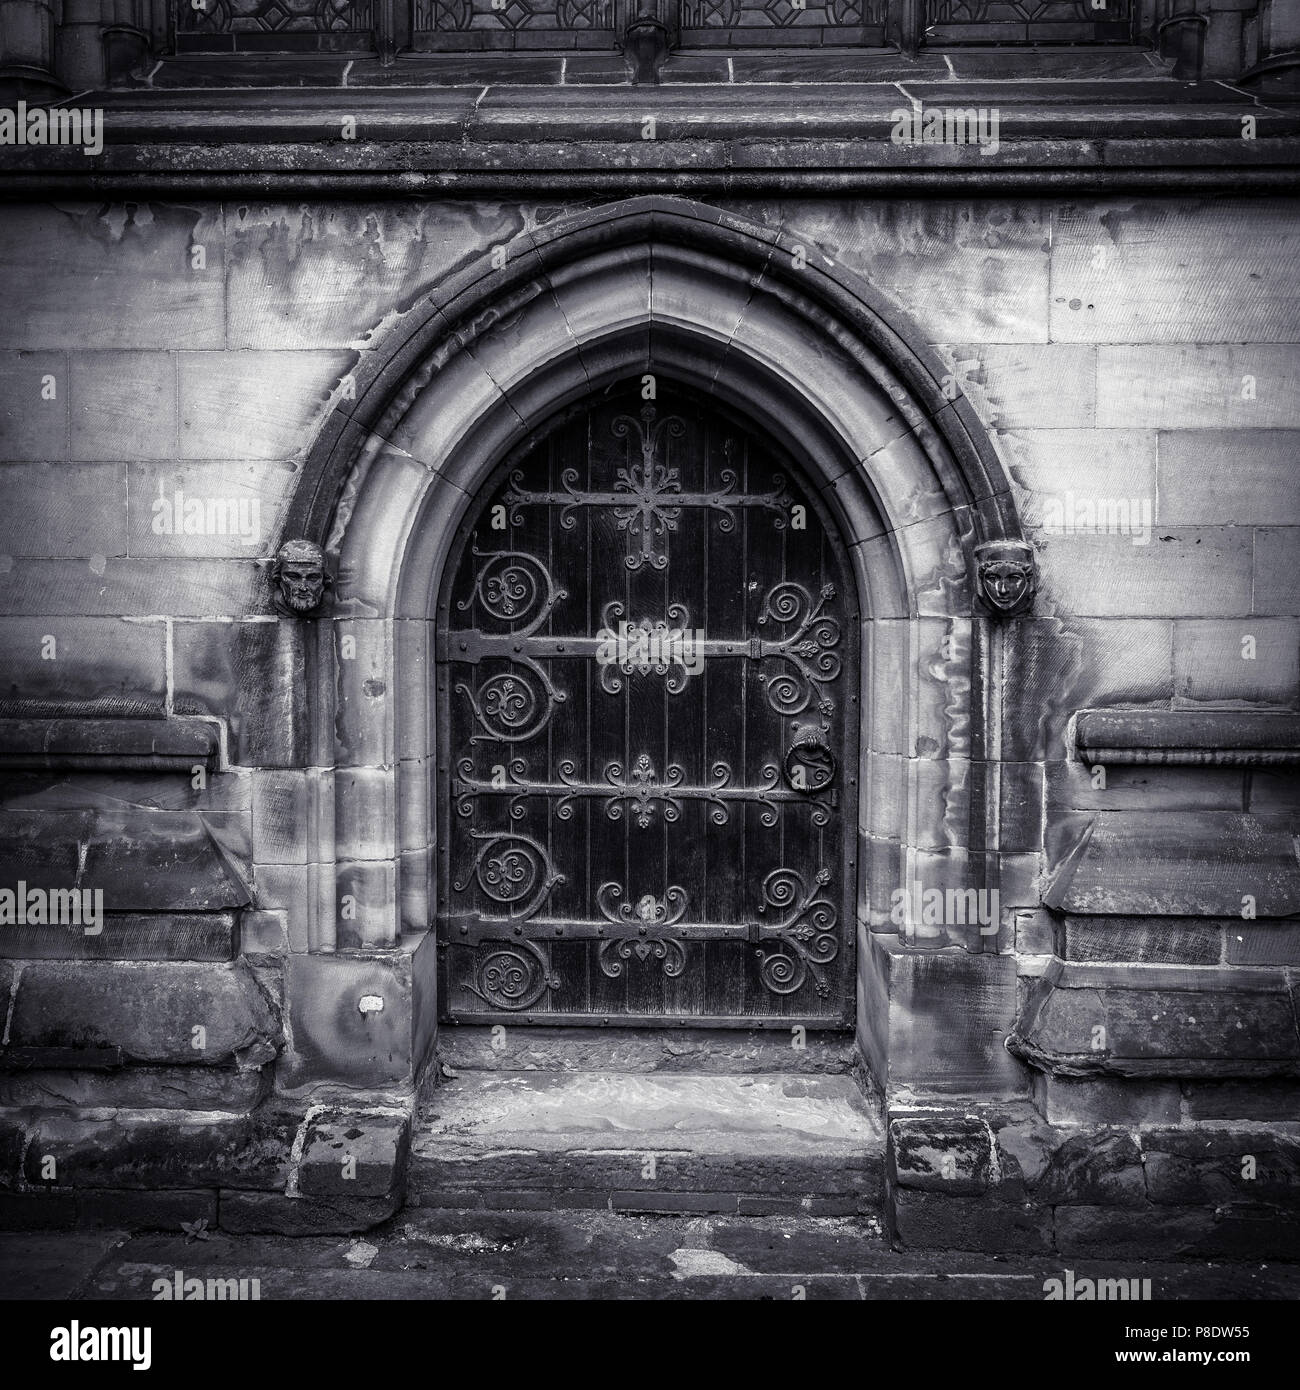 Black and white ornate gothic medieval arched door. Stock Photo